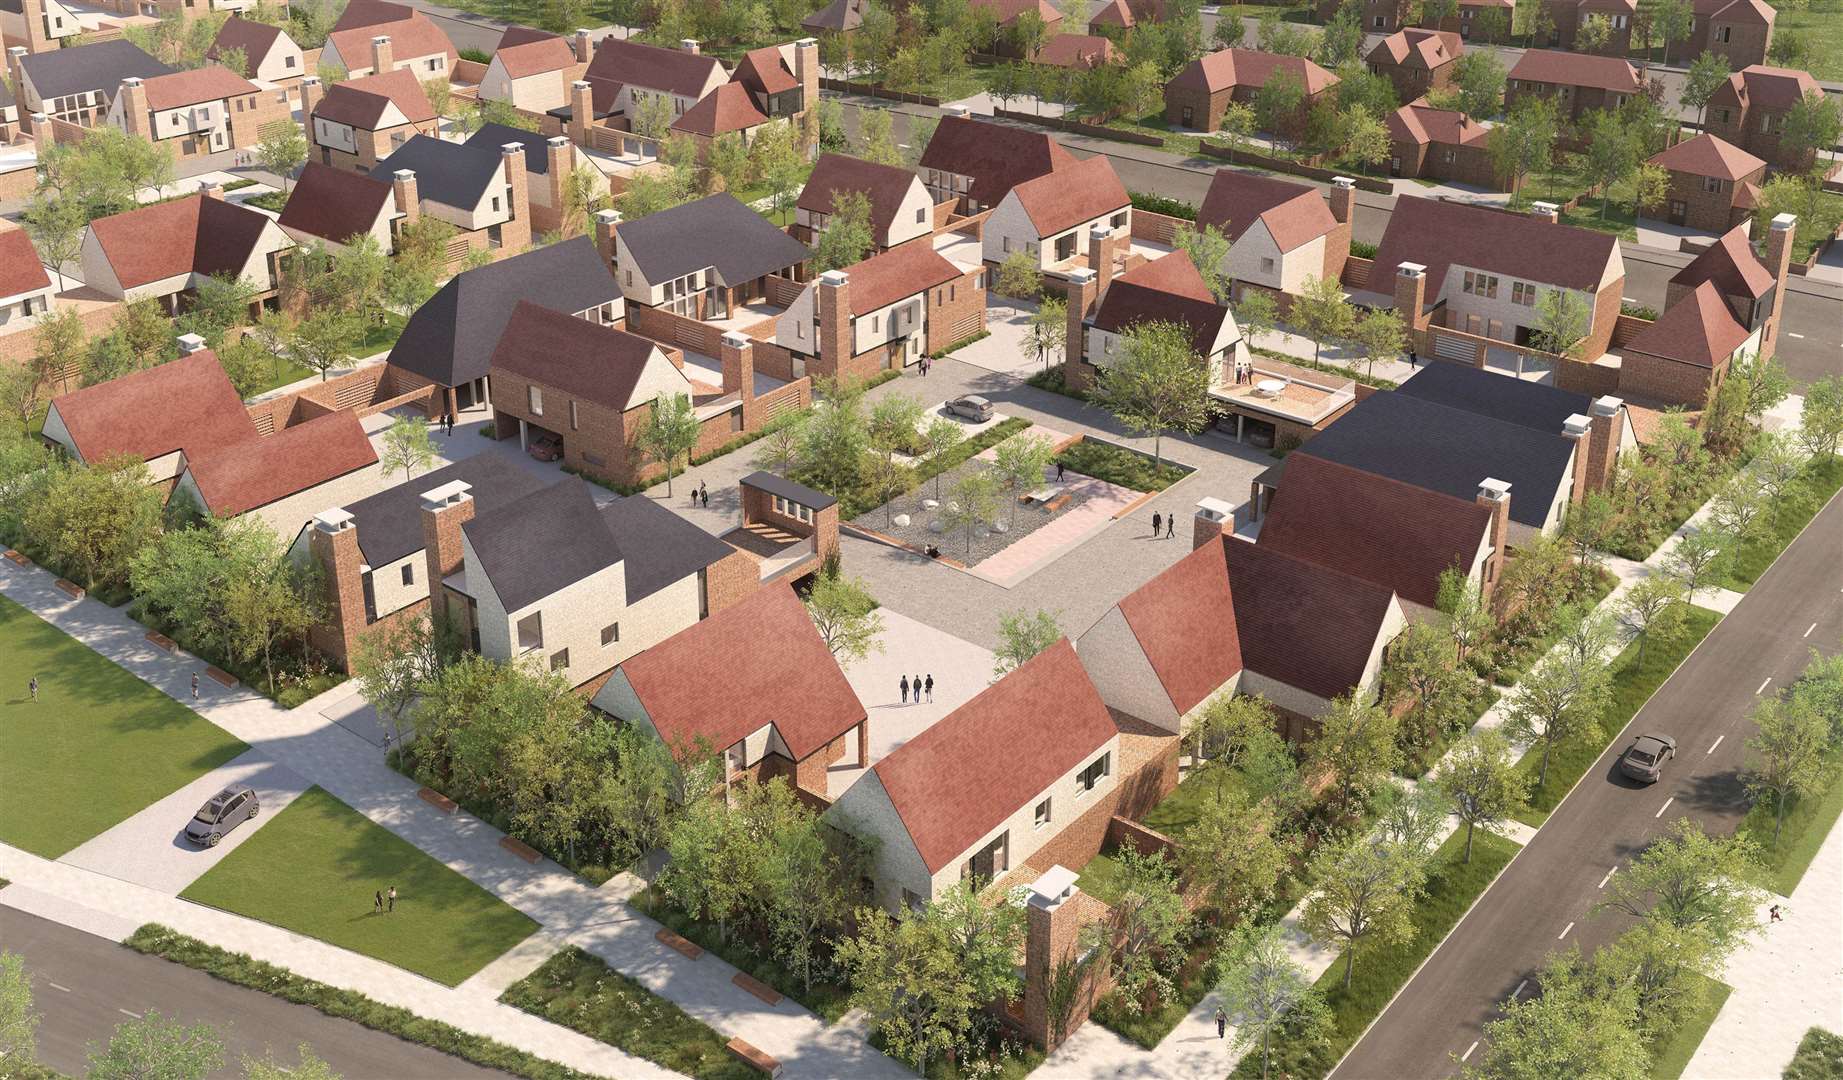 The 4,000-home Mountfield Park development in Canterbury is one of Kent's biggest housing projects